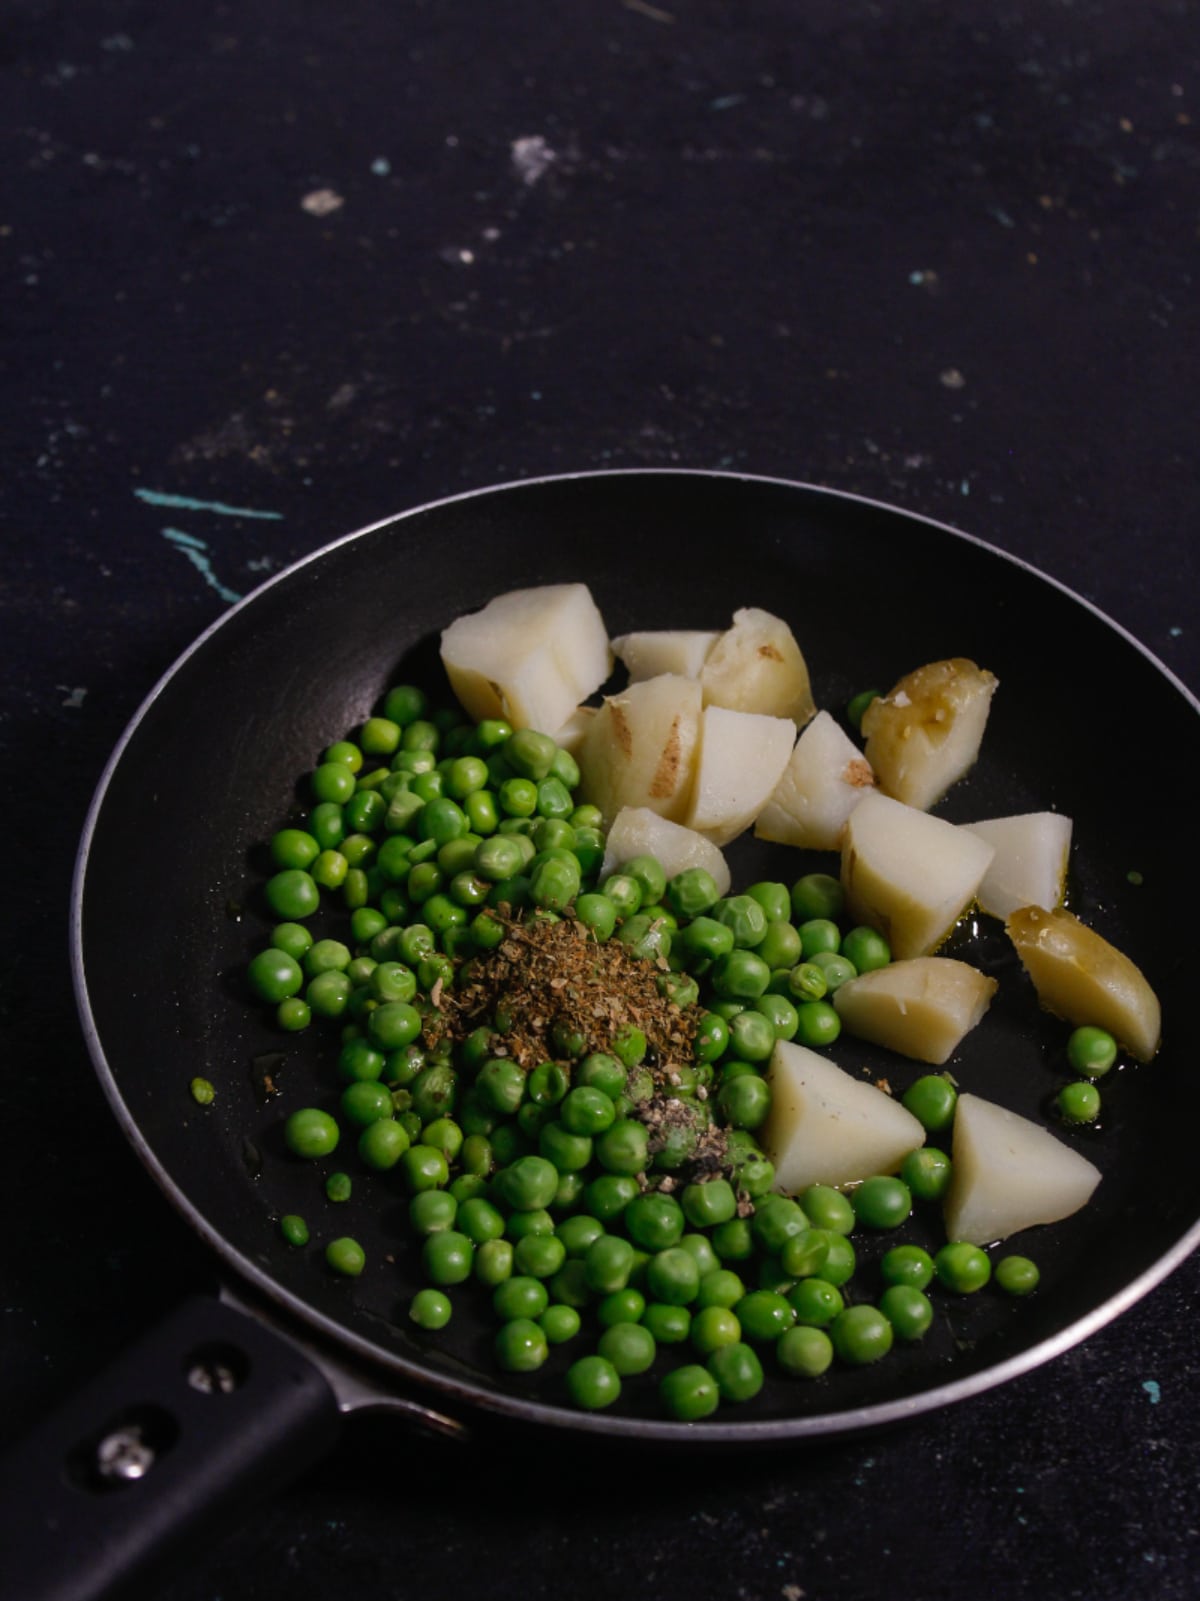 Blanch peas and cubed potatoes with spices in a pan